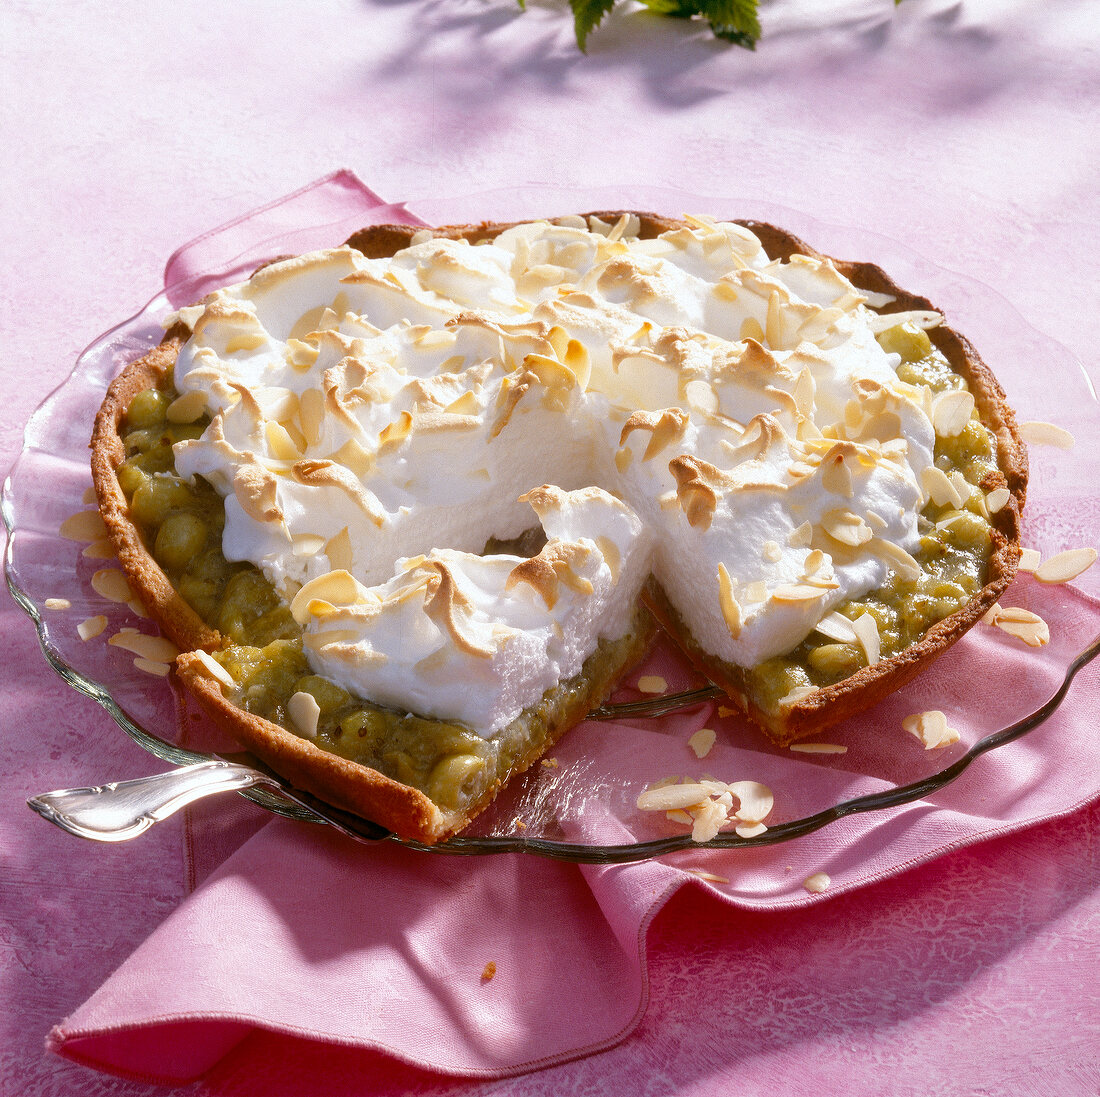 Gooseberry cake with toppings of meringue